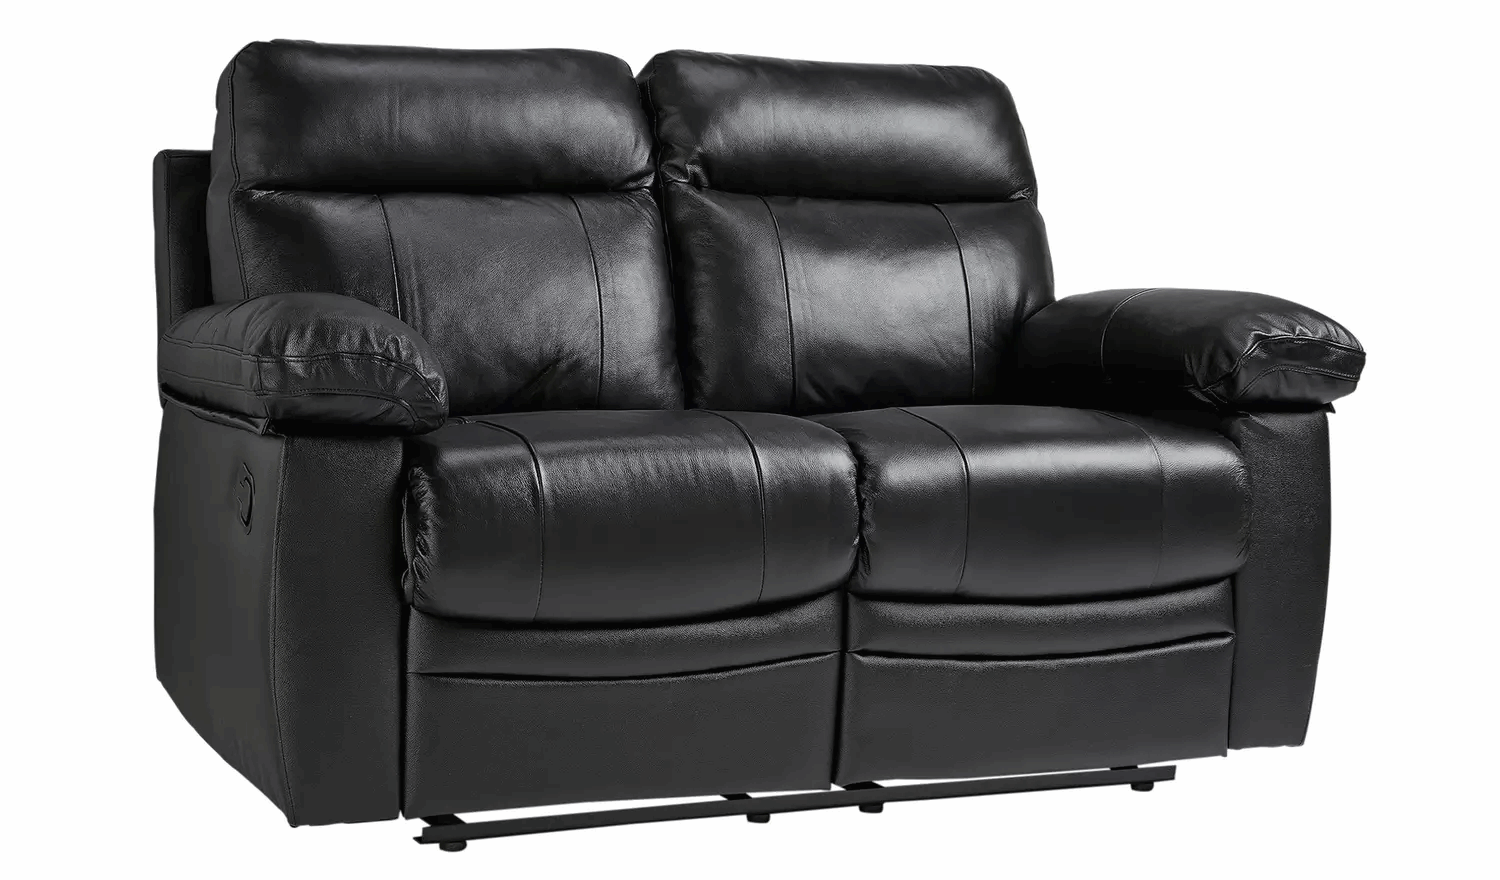 Paolo 2 Seater Manual Recliner Sofa - Black